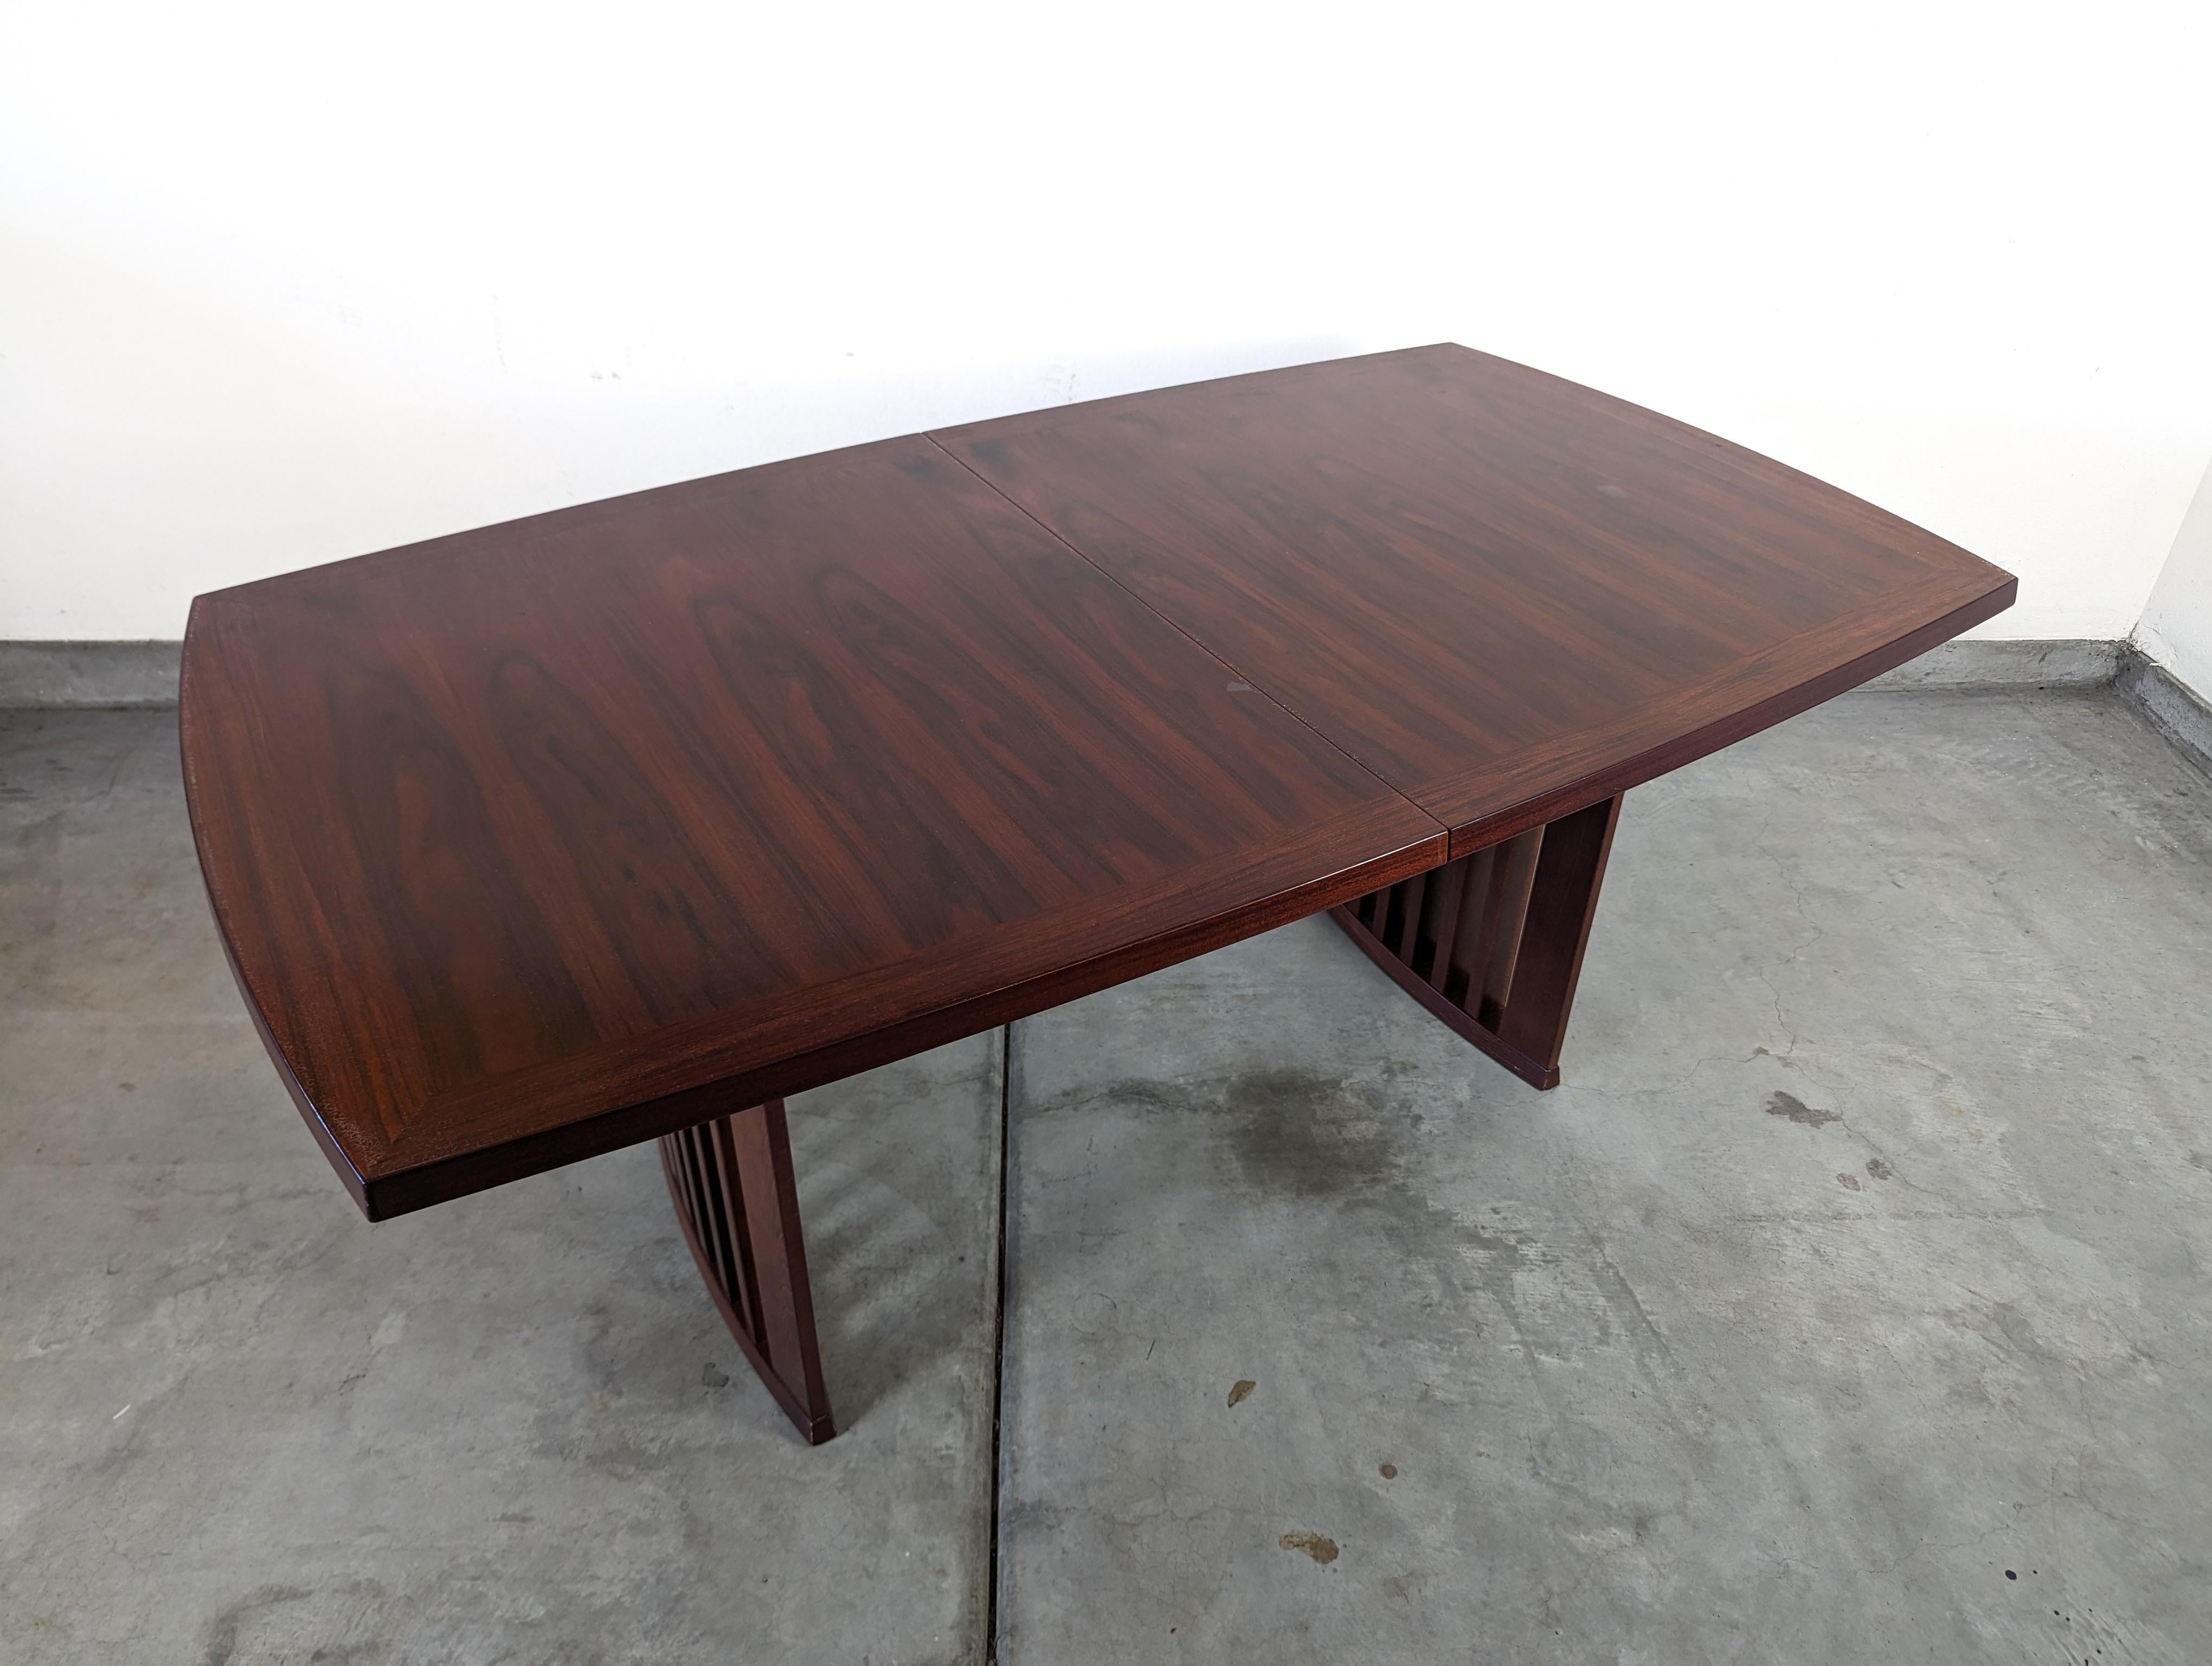 Enhance your dining experience with this exquisite vintage mid century Skovby #19 dining table. Crafted with exceptional attention to detail, this Danish masterpiece combines timeless design with ingenious functionality. Its unique feature allows